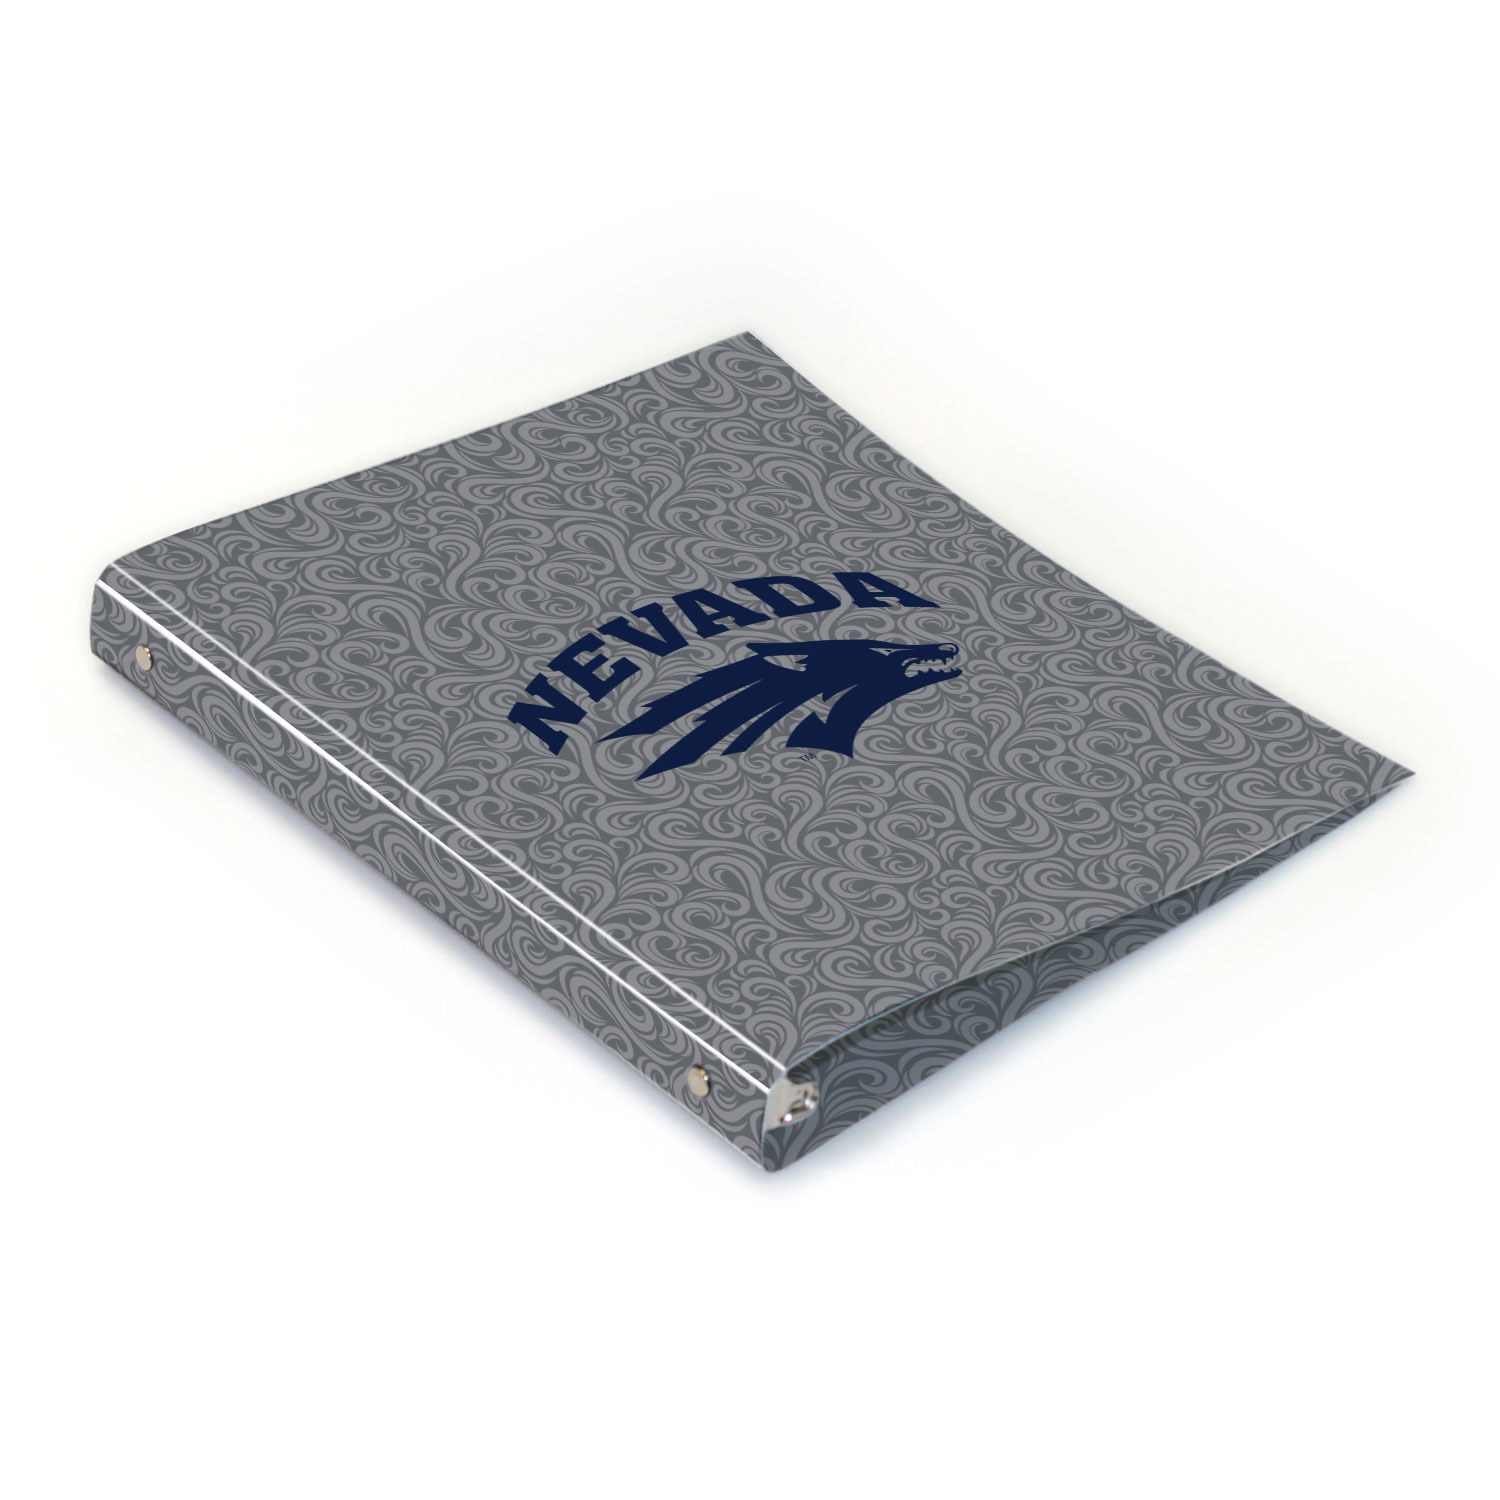 Nevada Wolfpack Full Color 2 sided Imprinted Flexible 1" Logo 2 Binder 10.5" x 11.5"